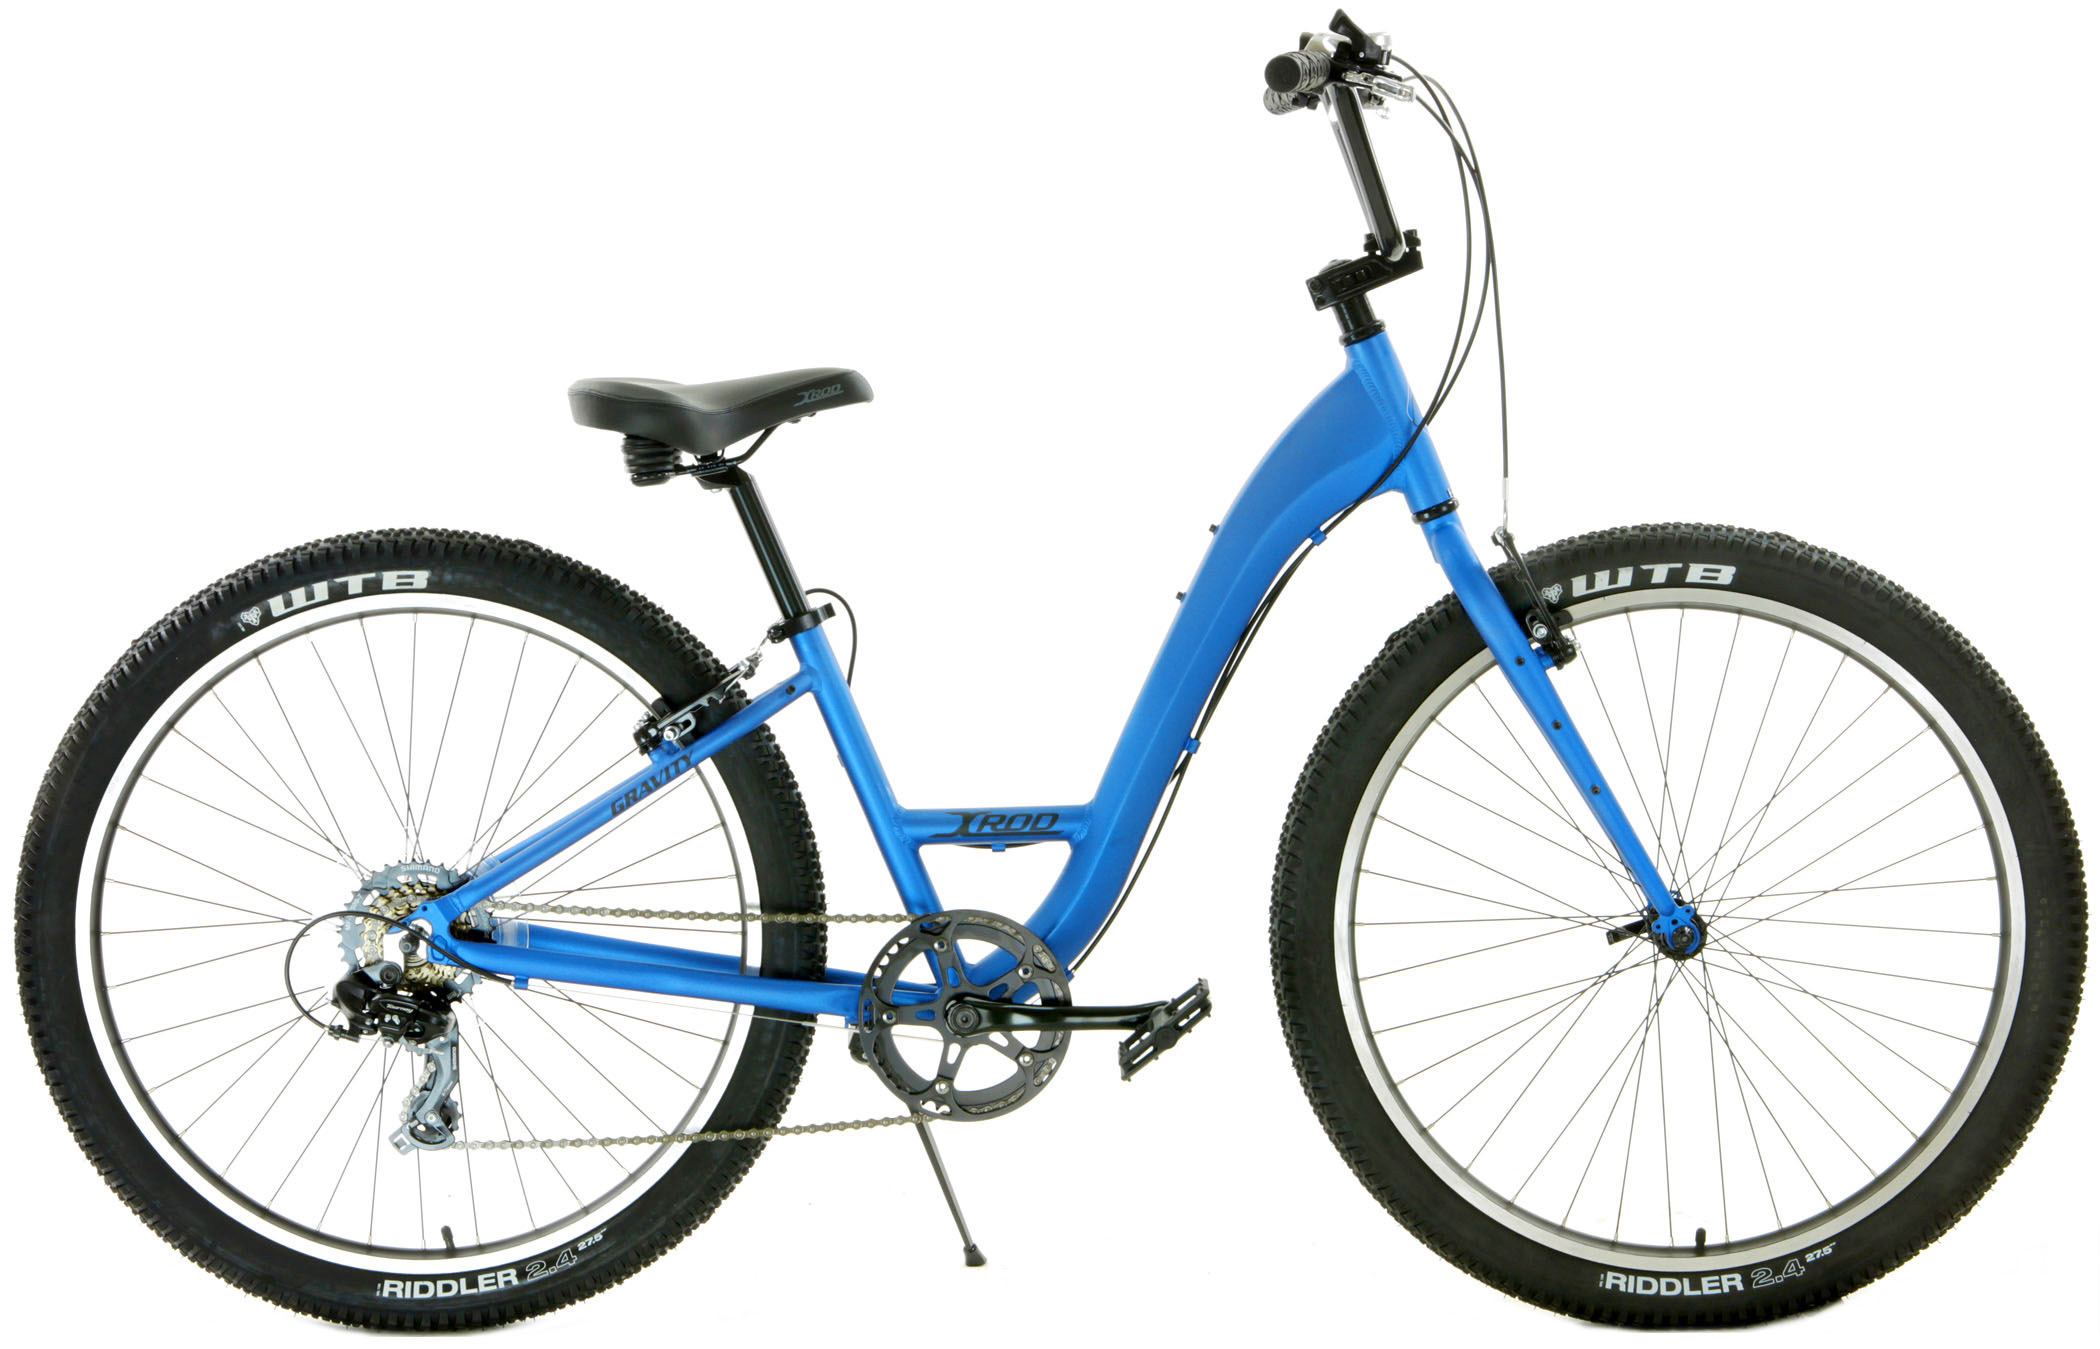 Save up to 60% off new Super Hybrid Comfort Fitness Bikes